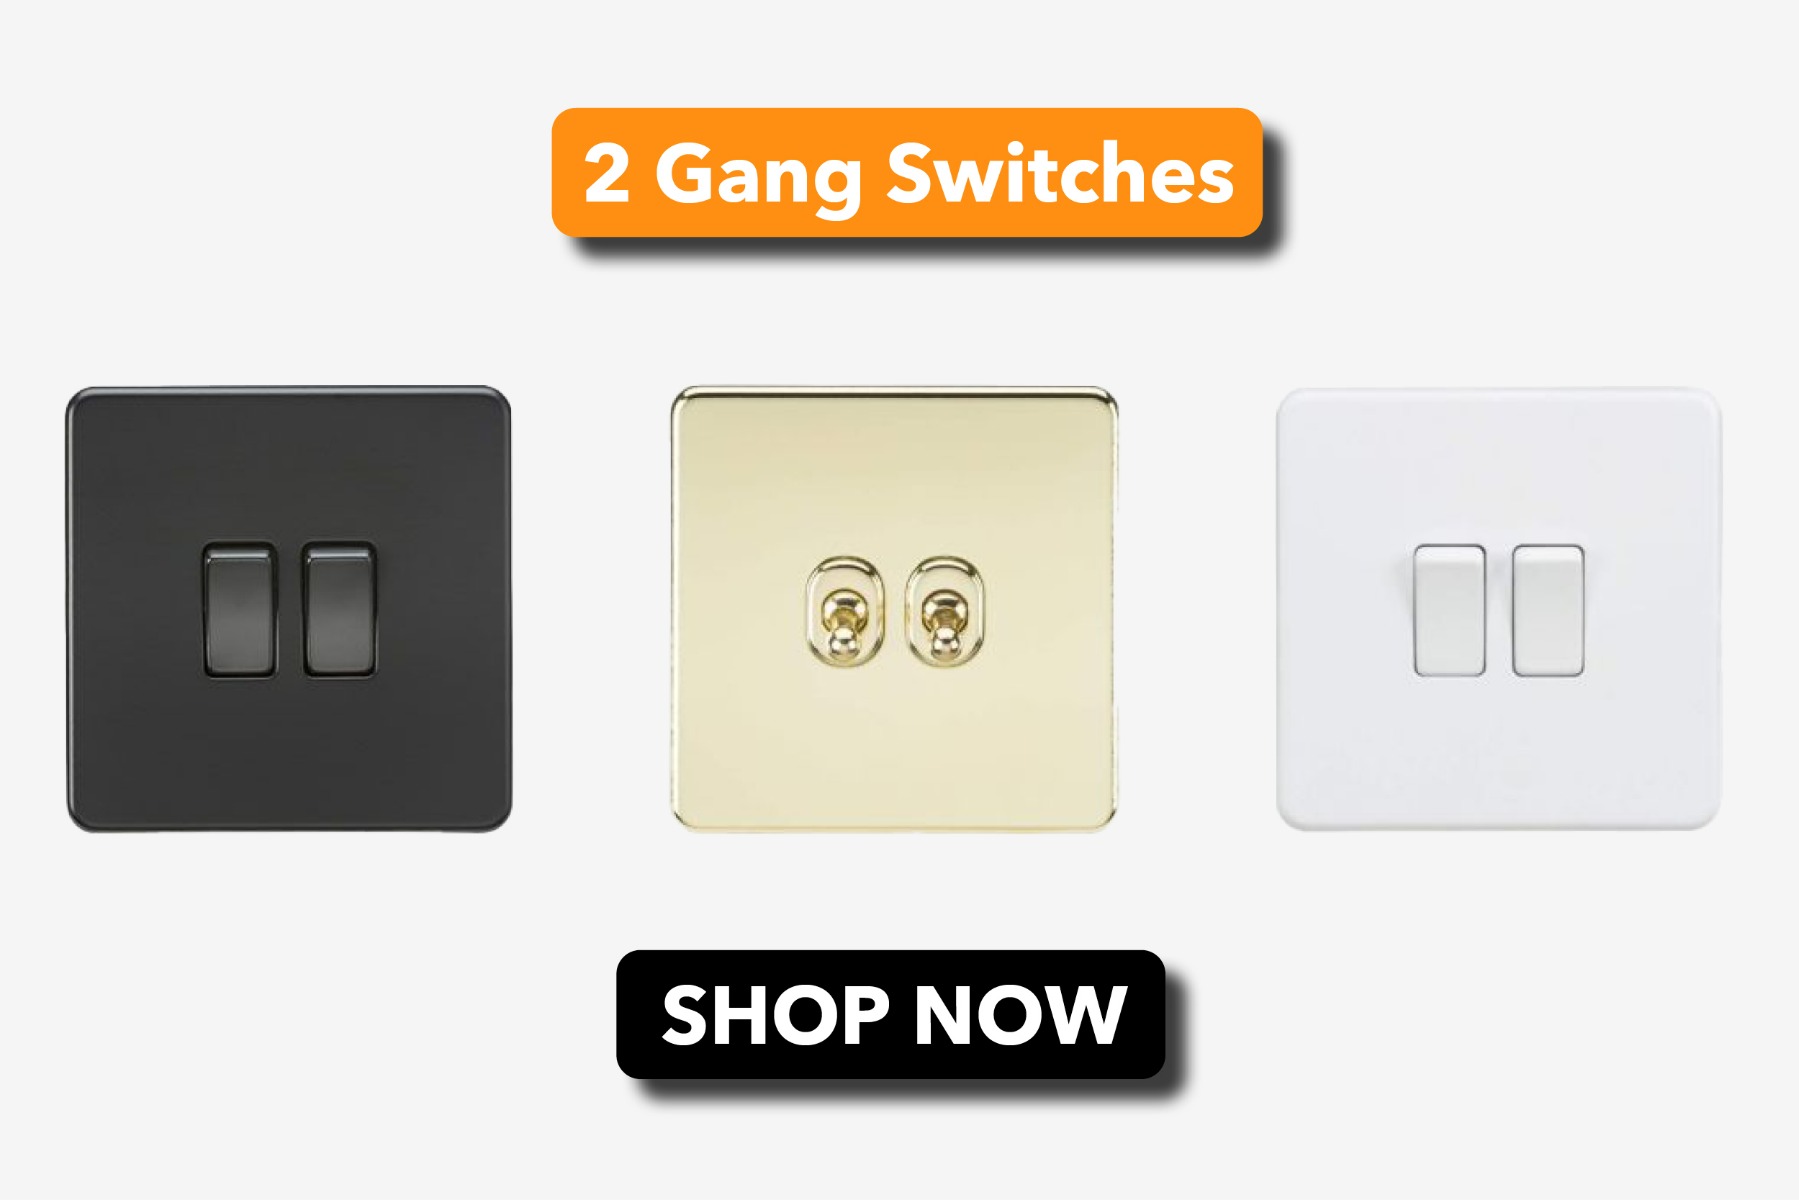 2 Gang light switches